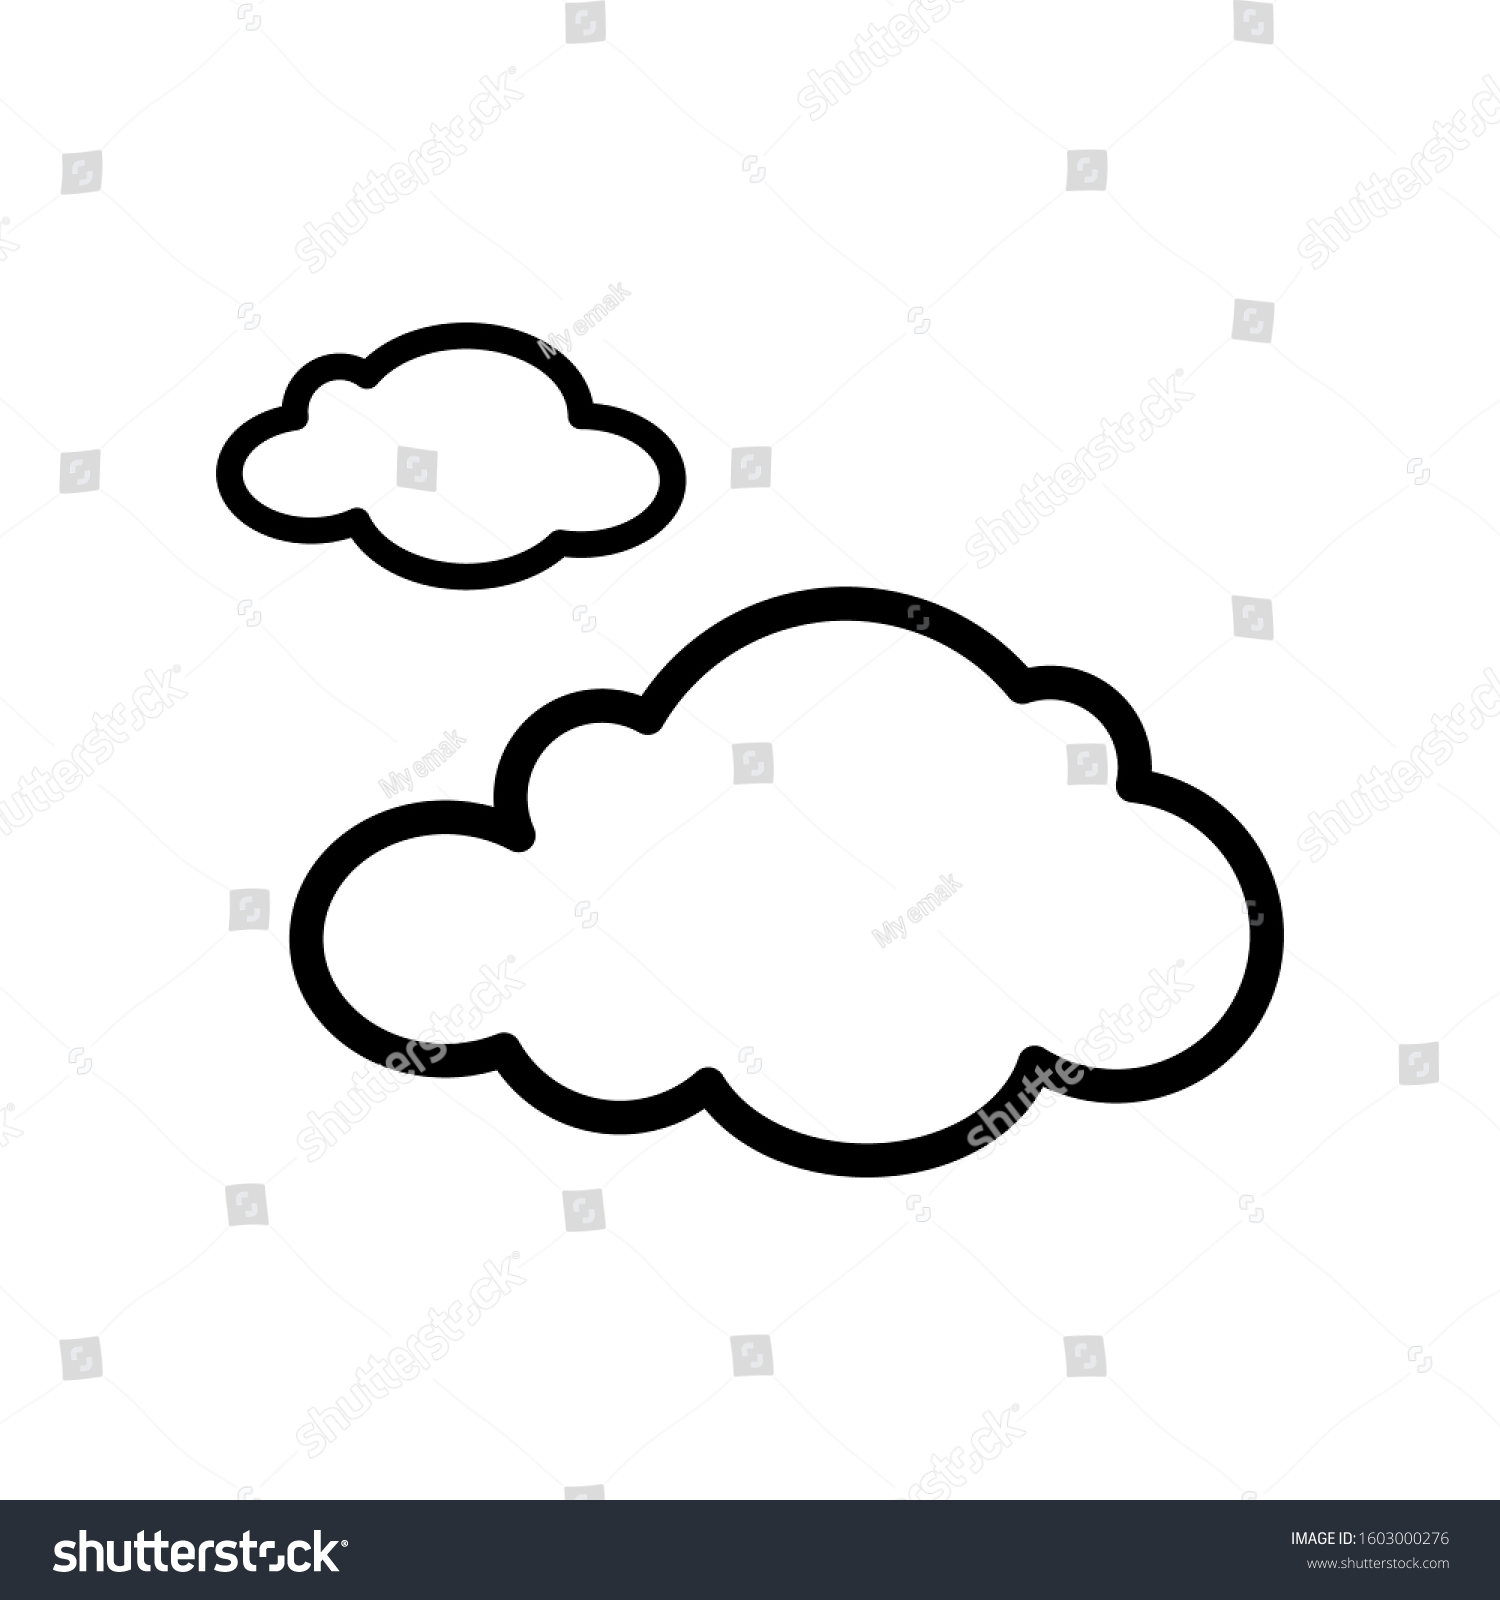 Cloud icon vector in outline style design #1603000276